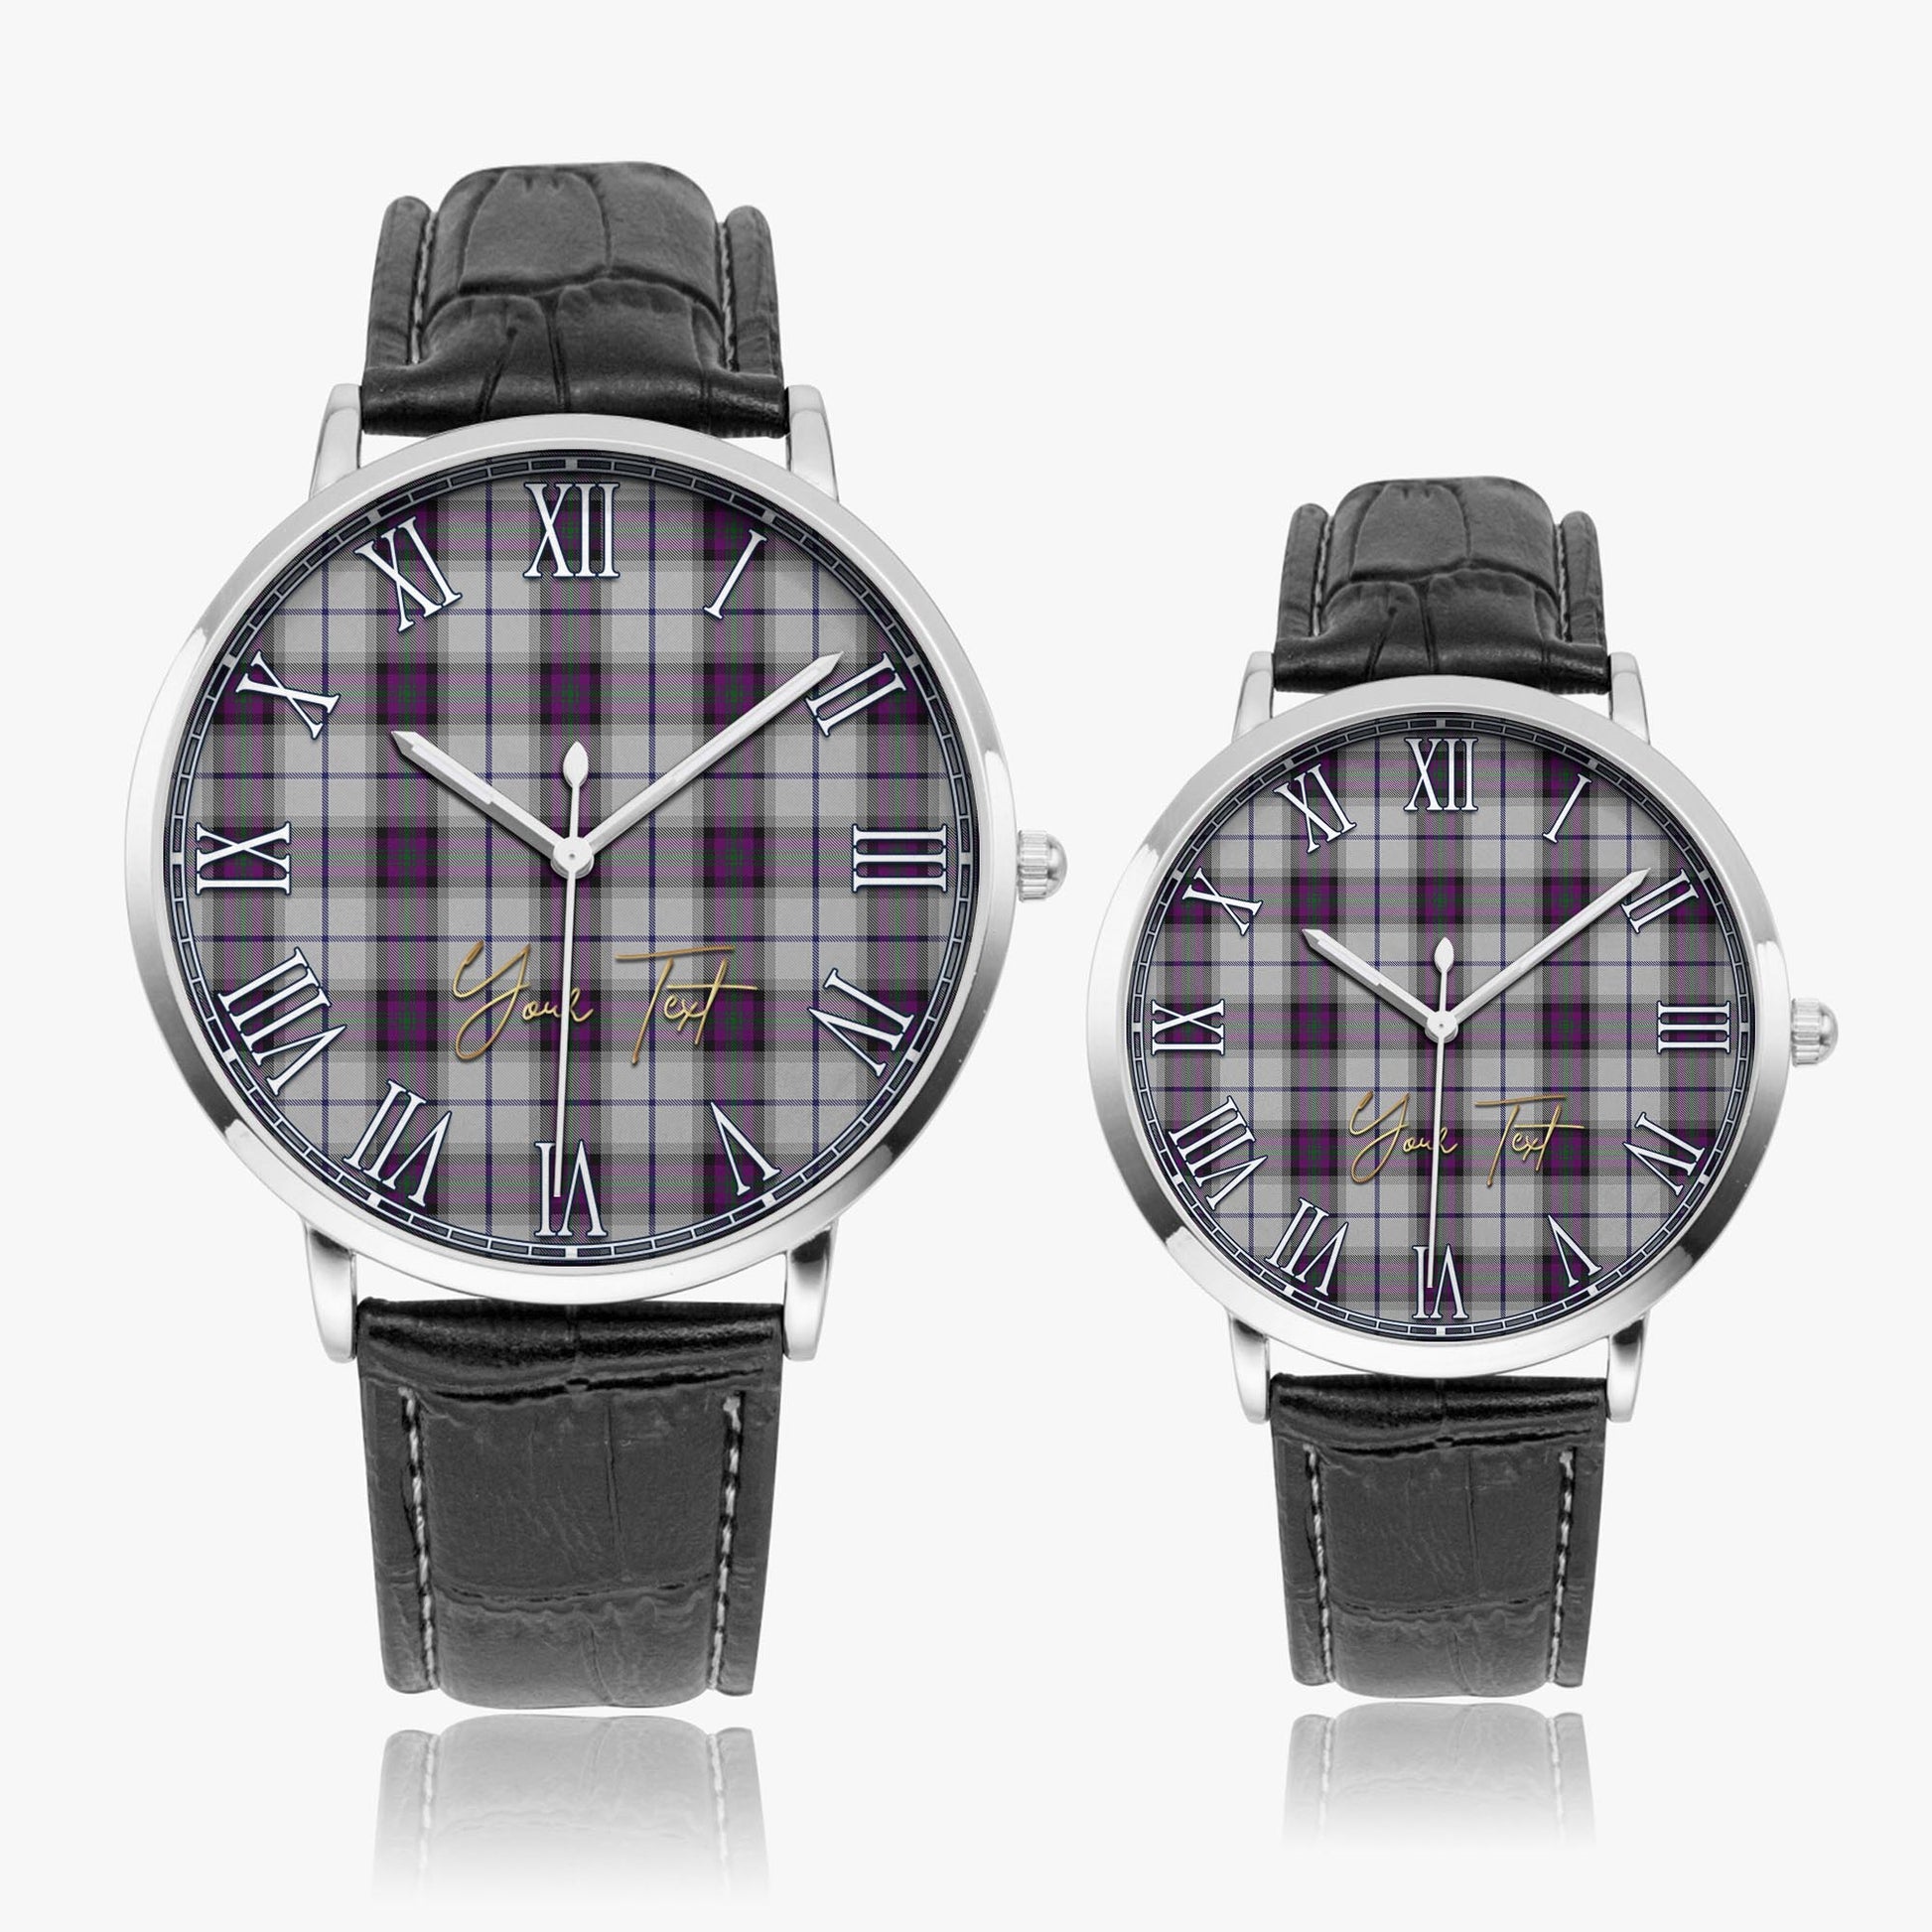 Alexander of Menstry Dress Tartan Personalized Your Text Leather Trap Quartz Watch Ultra Thin Silver Case With Black Leather Strap - Tartanvibesclothing